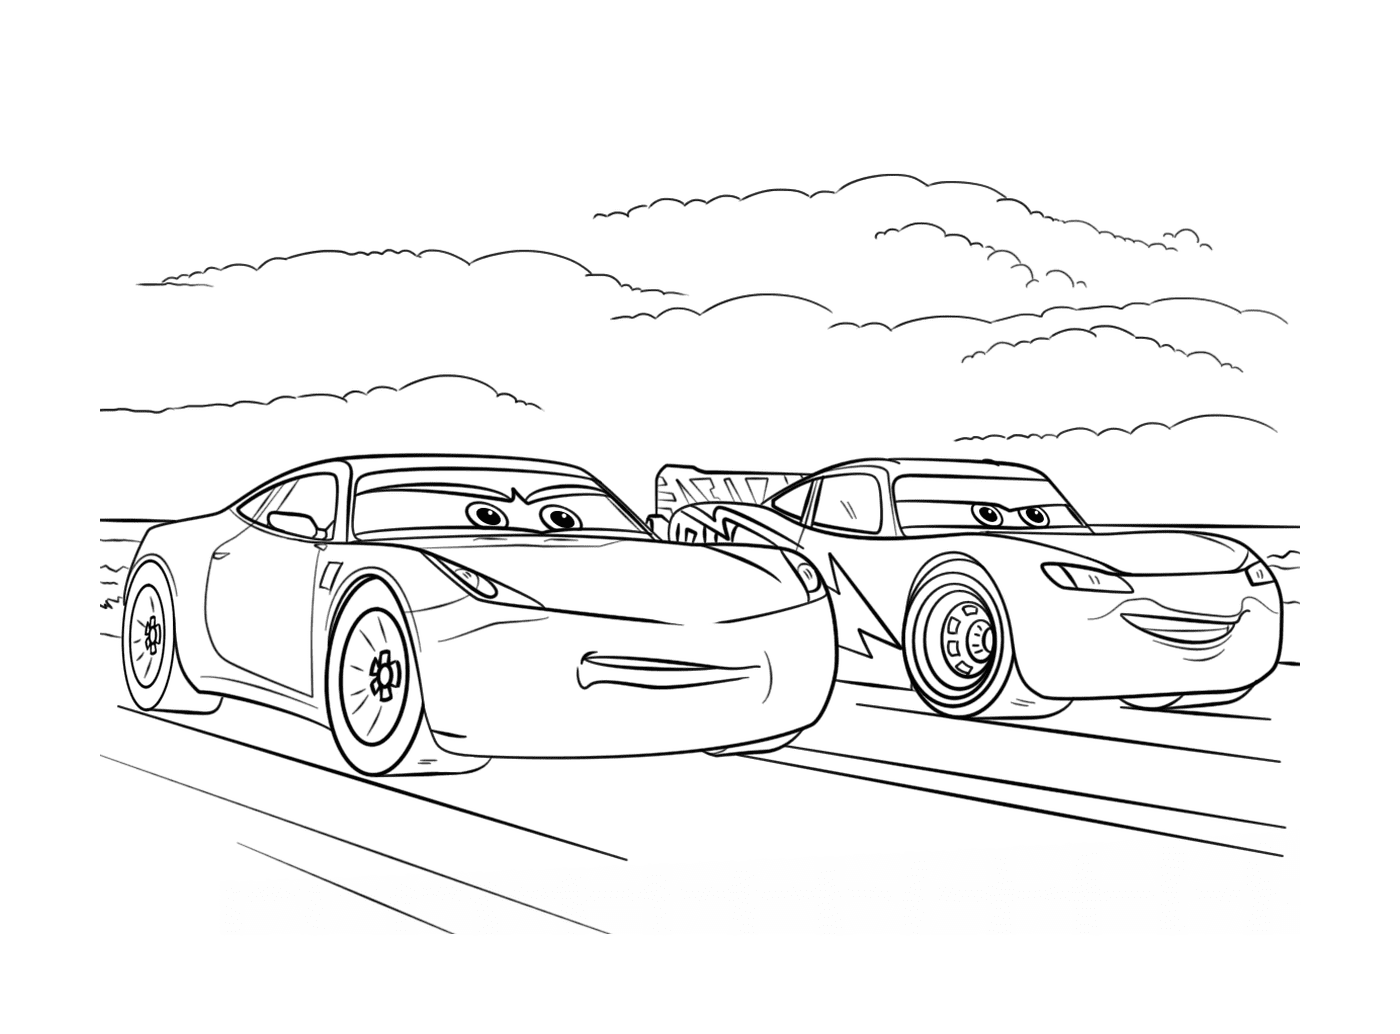 mcqueen and ramirez from cars 3 disney